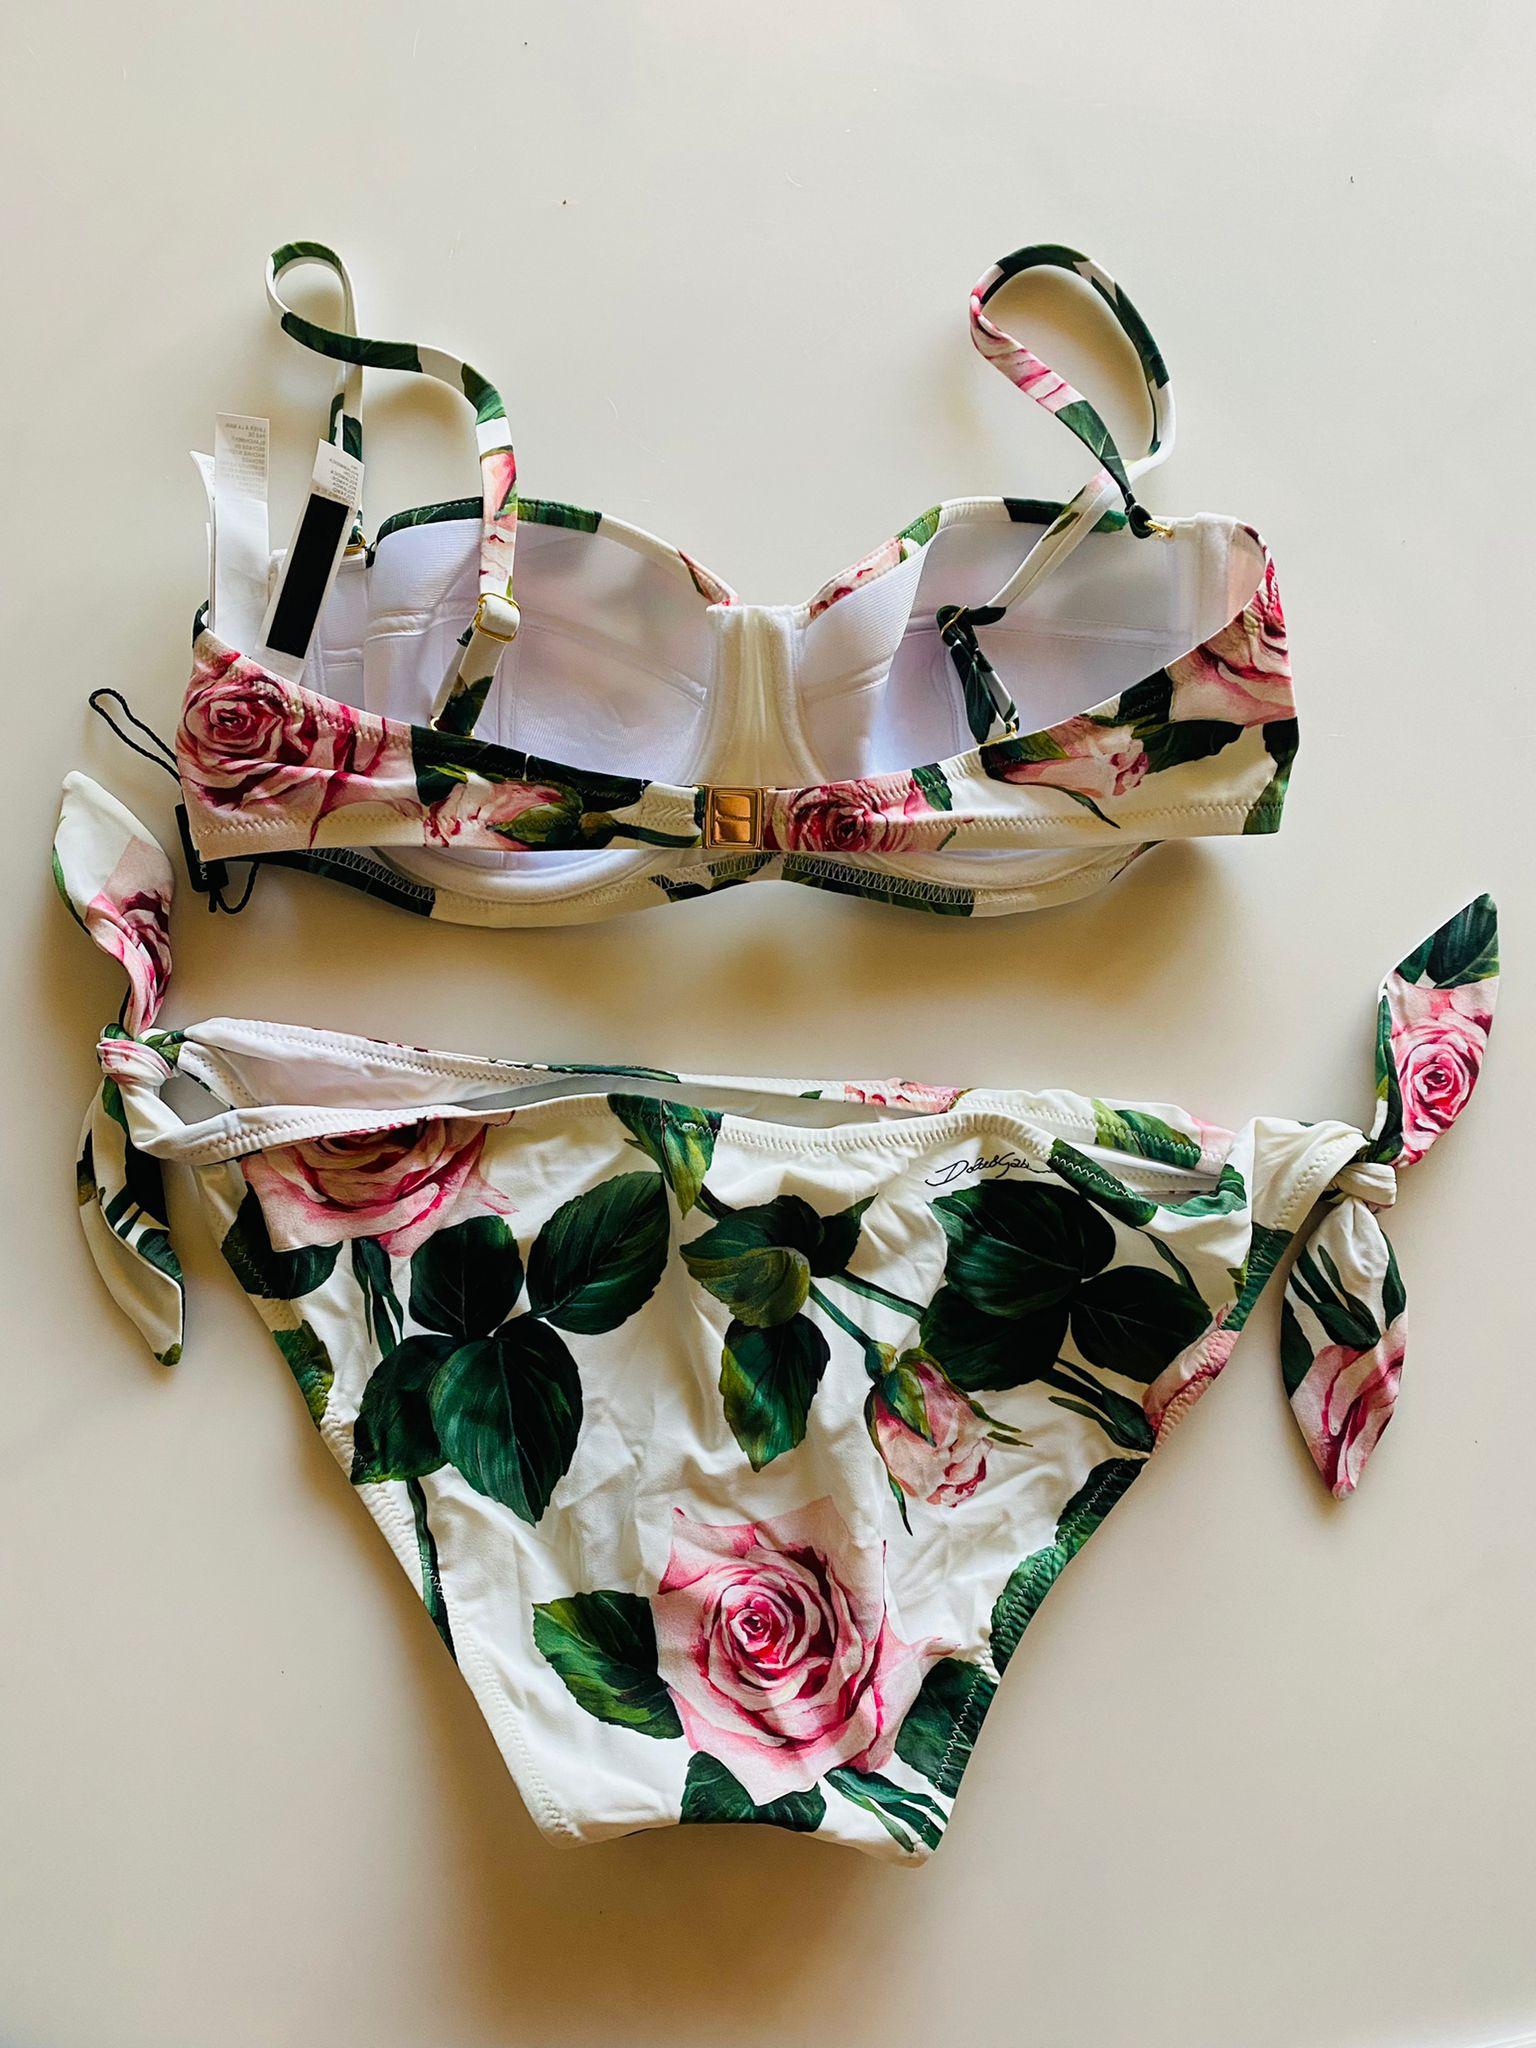 Dolce & Gabbana timeless balconette bikini top and bottoms set in fine fabric comes in TROPICAL ROSE print and is perfect for enhancing every woman’s femininity:
-	Bra with padded cups and wiring
-	Adjustable bows on the sides
-	Rear branded